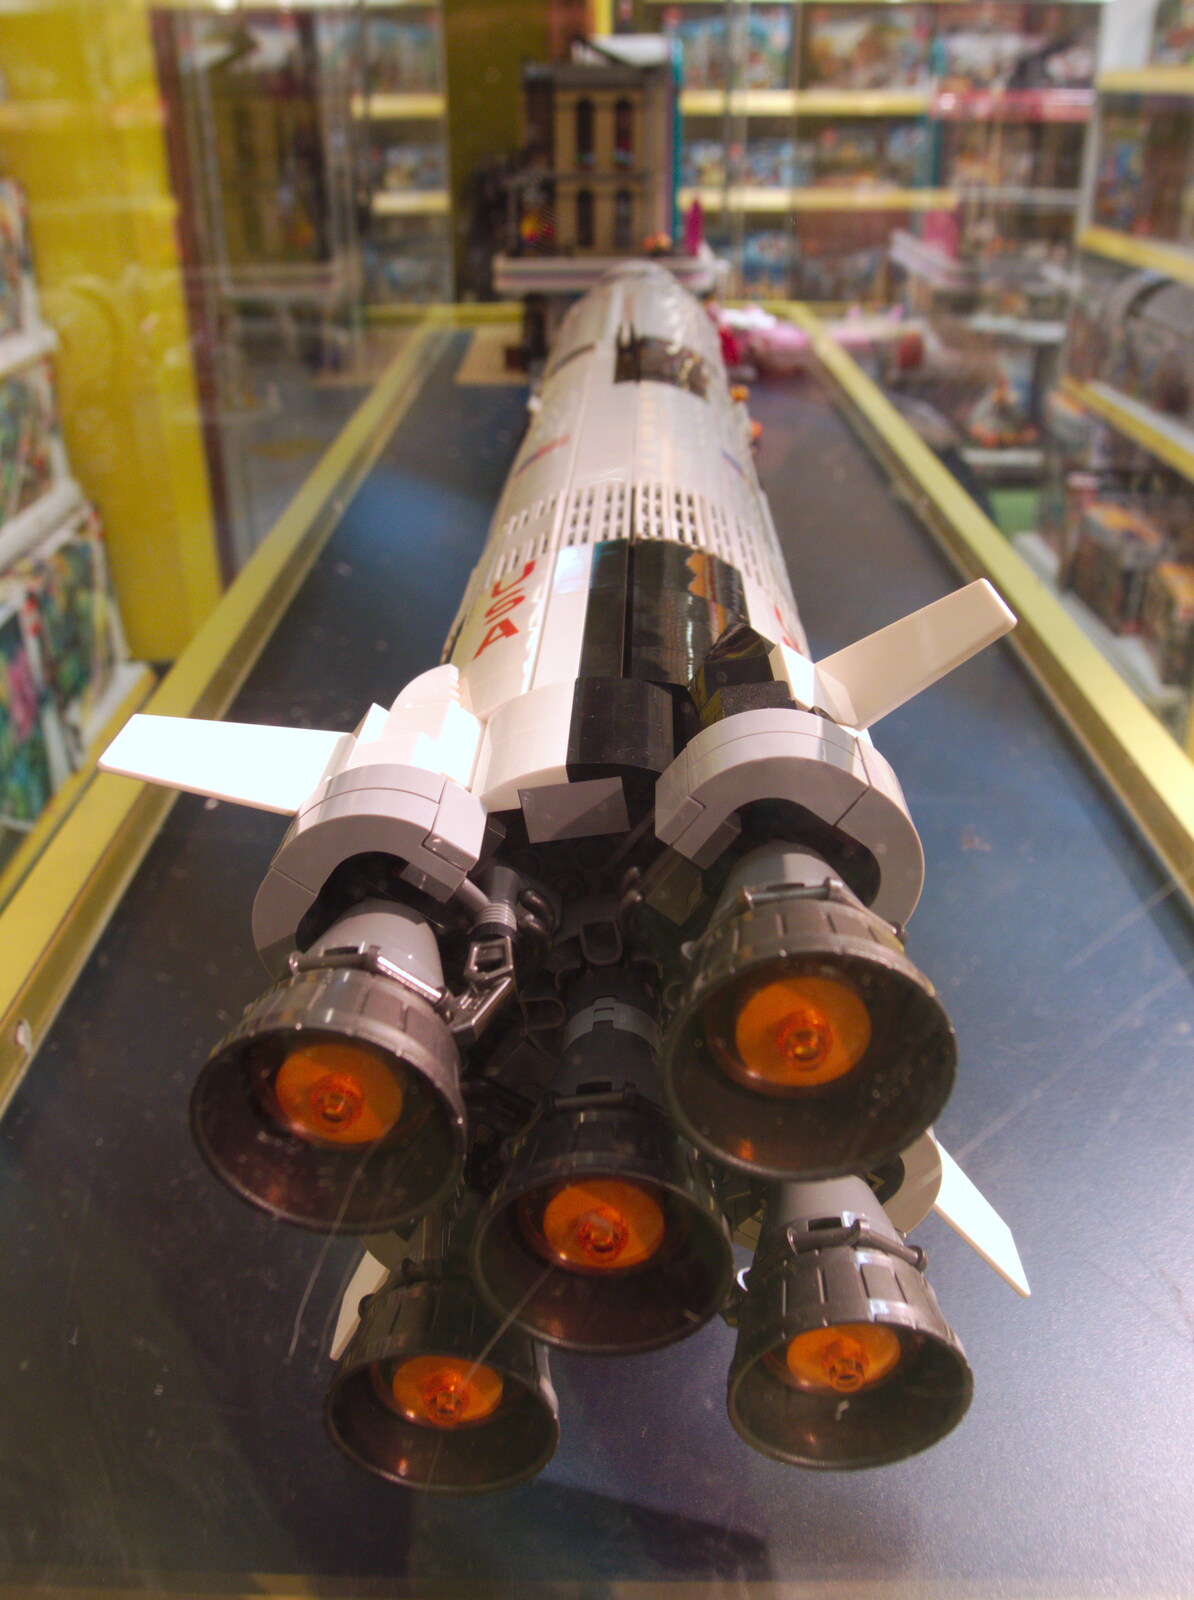 There's a cool Lego Saturn V In Jarrold's from Norwich in Ninety, and Christmas Trees, Norwich and Diss - 8th December 2019